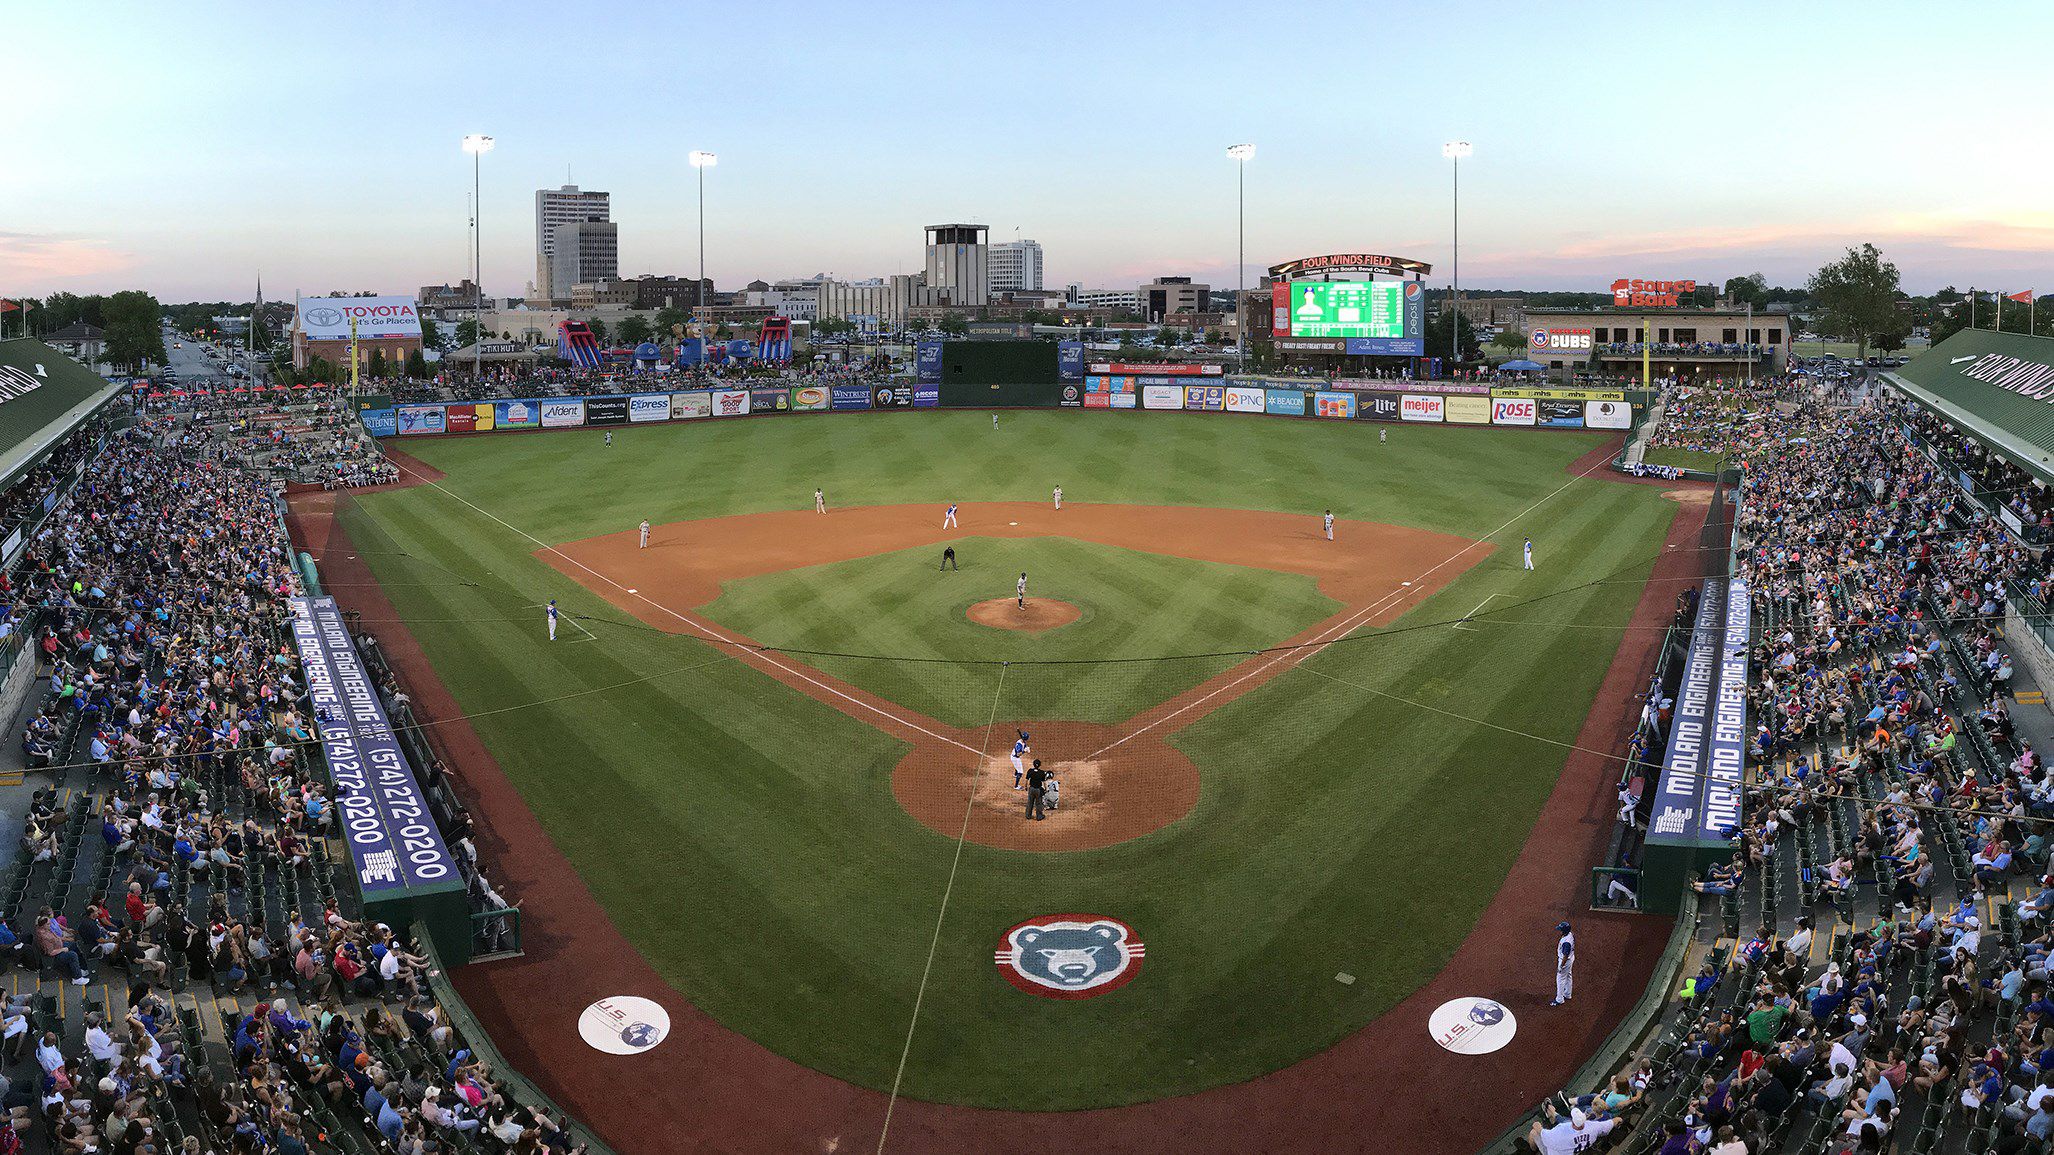 South Bend Cubs will host Chicago Cubs Watch Parties